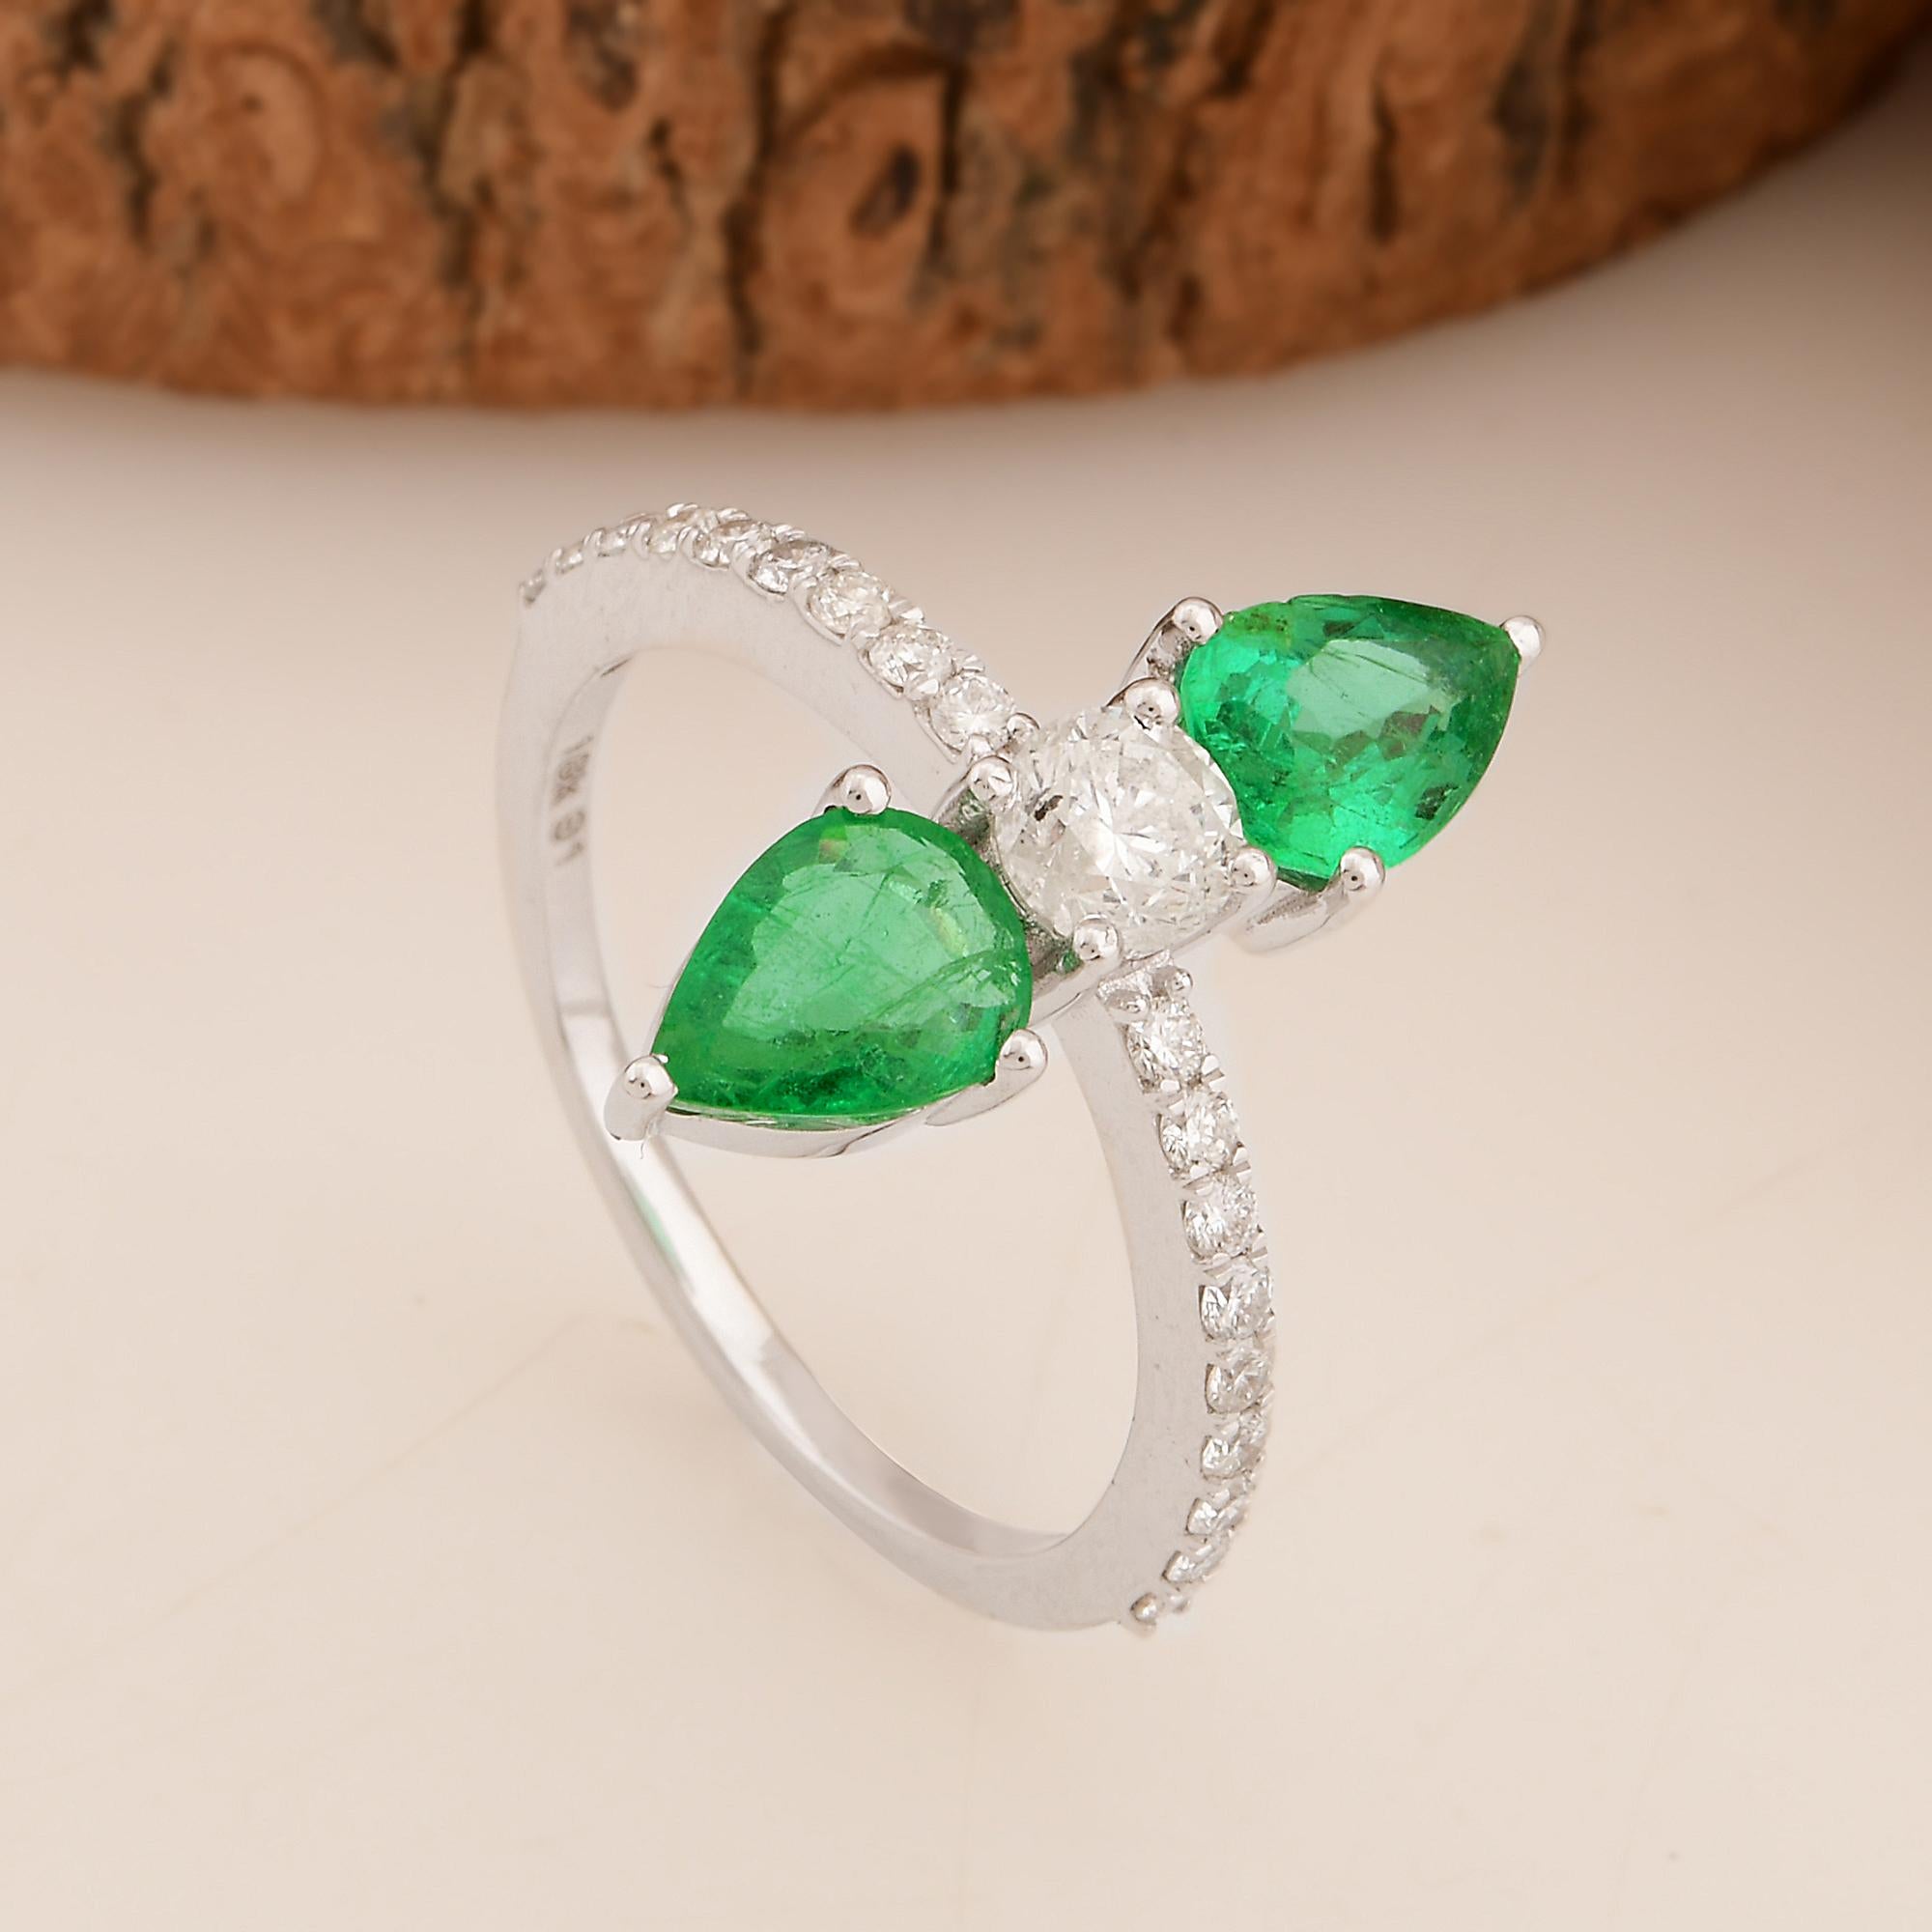 Women's Natural Pear Emerald Gemstone Band Ring Diamond Solid 14k White Gold Jewelry For Sale